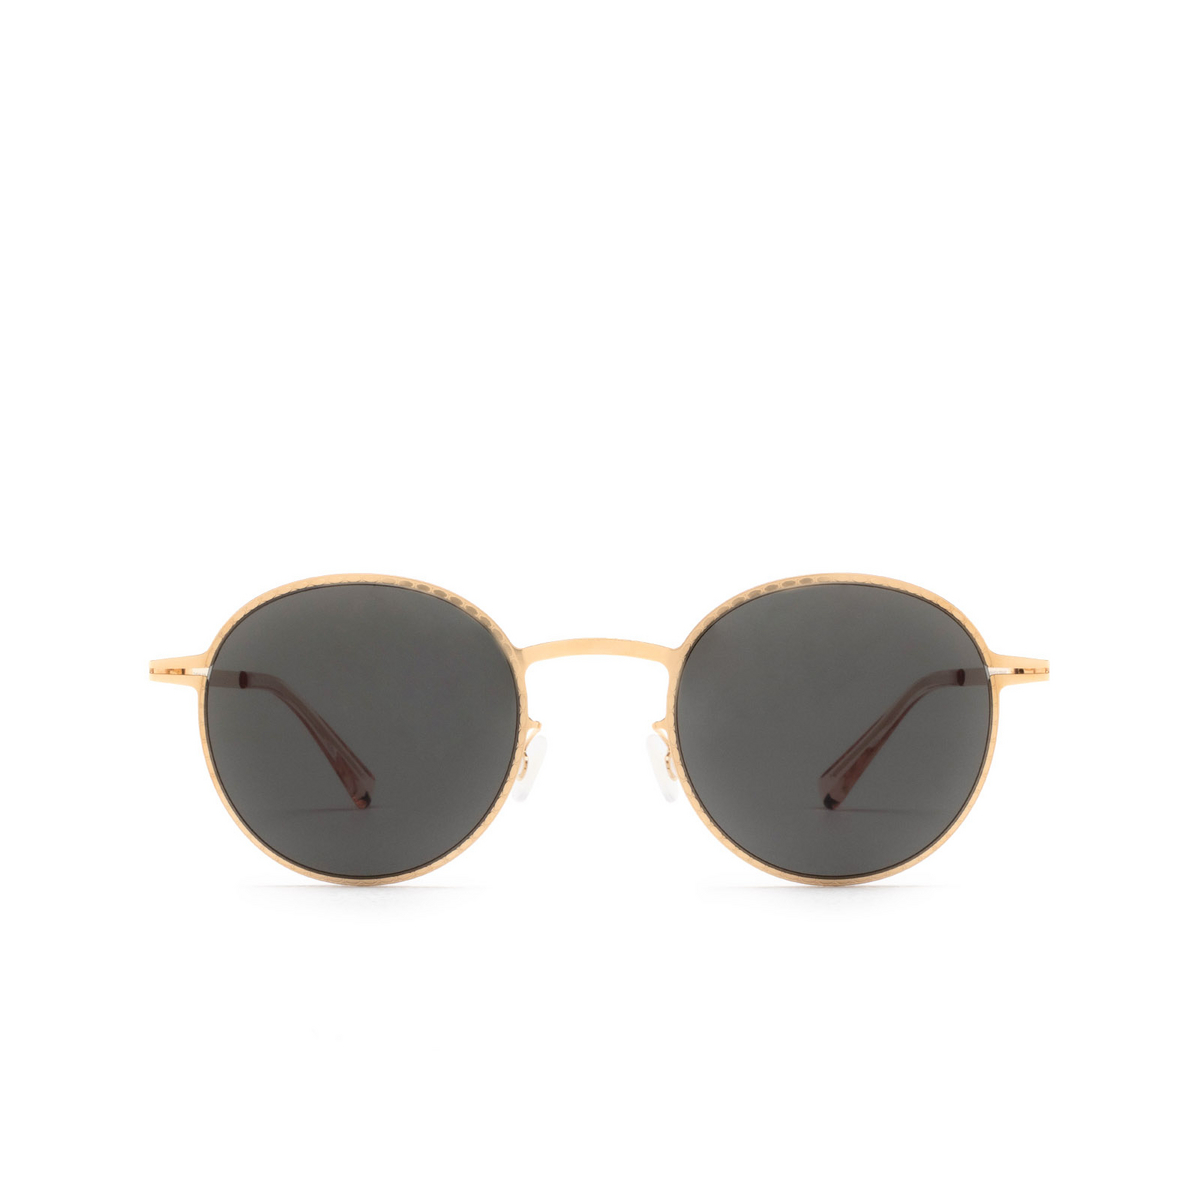 Mykita NIS Sunglasses 291 Champagne Gold - front view